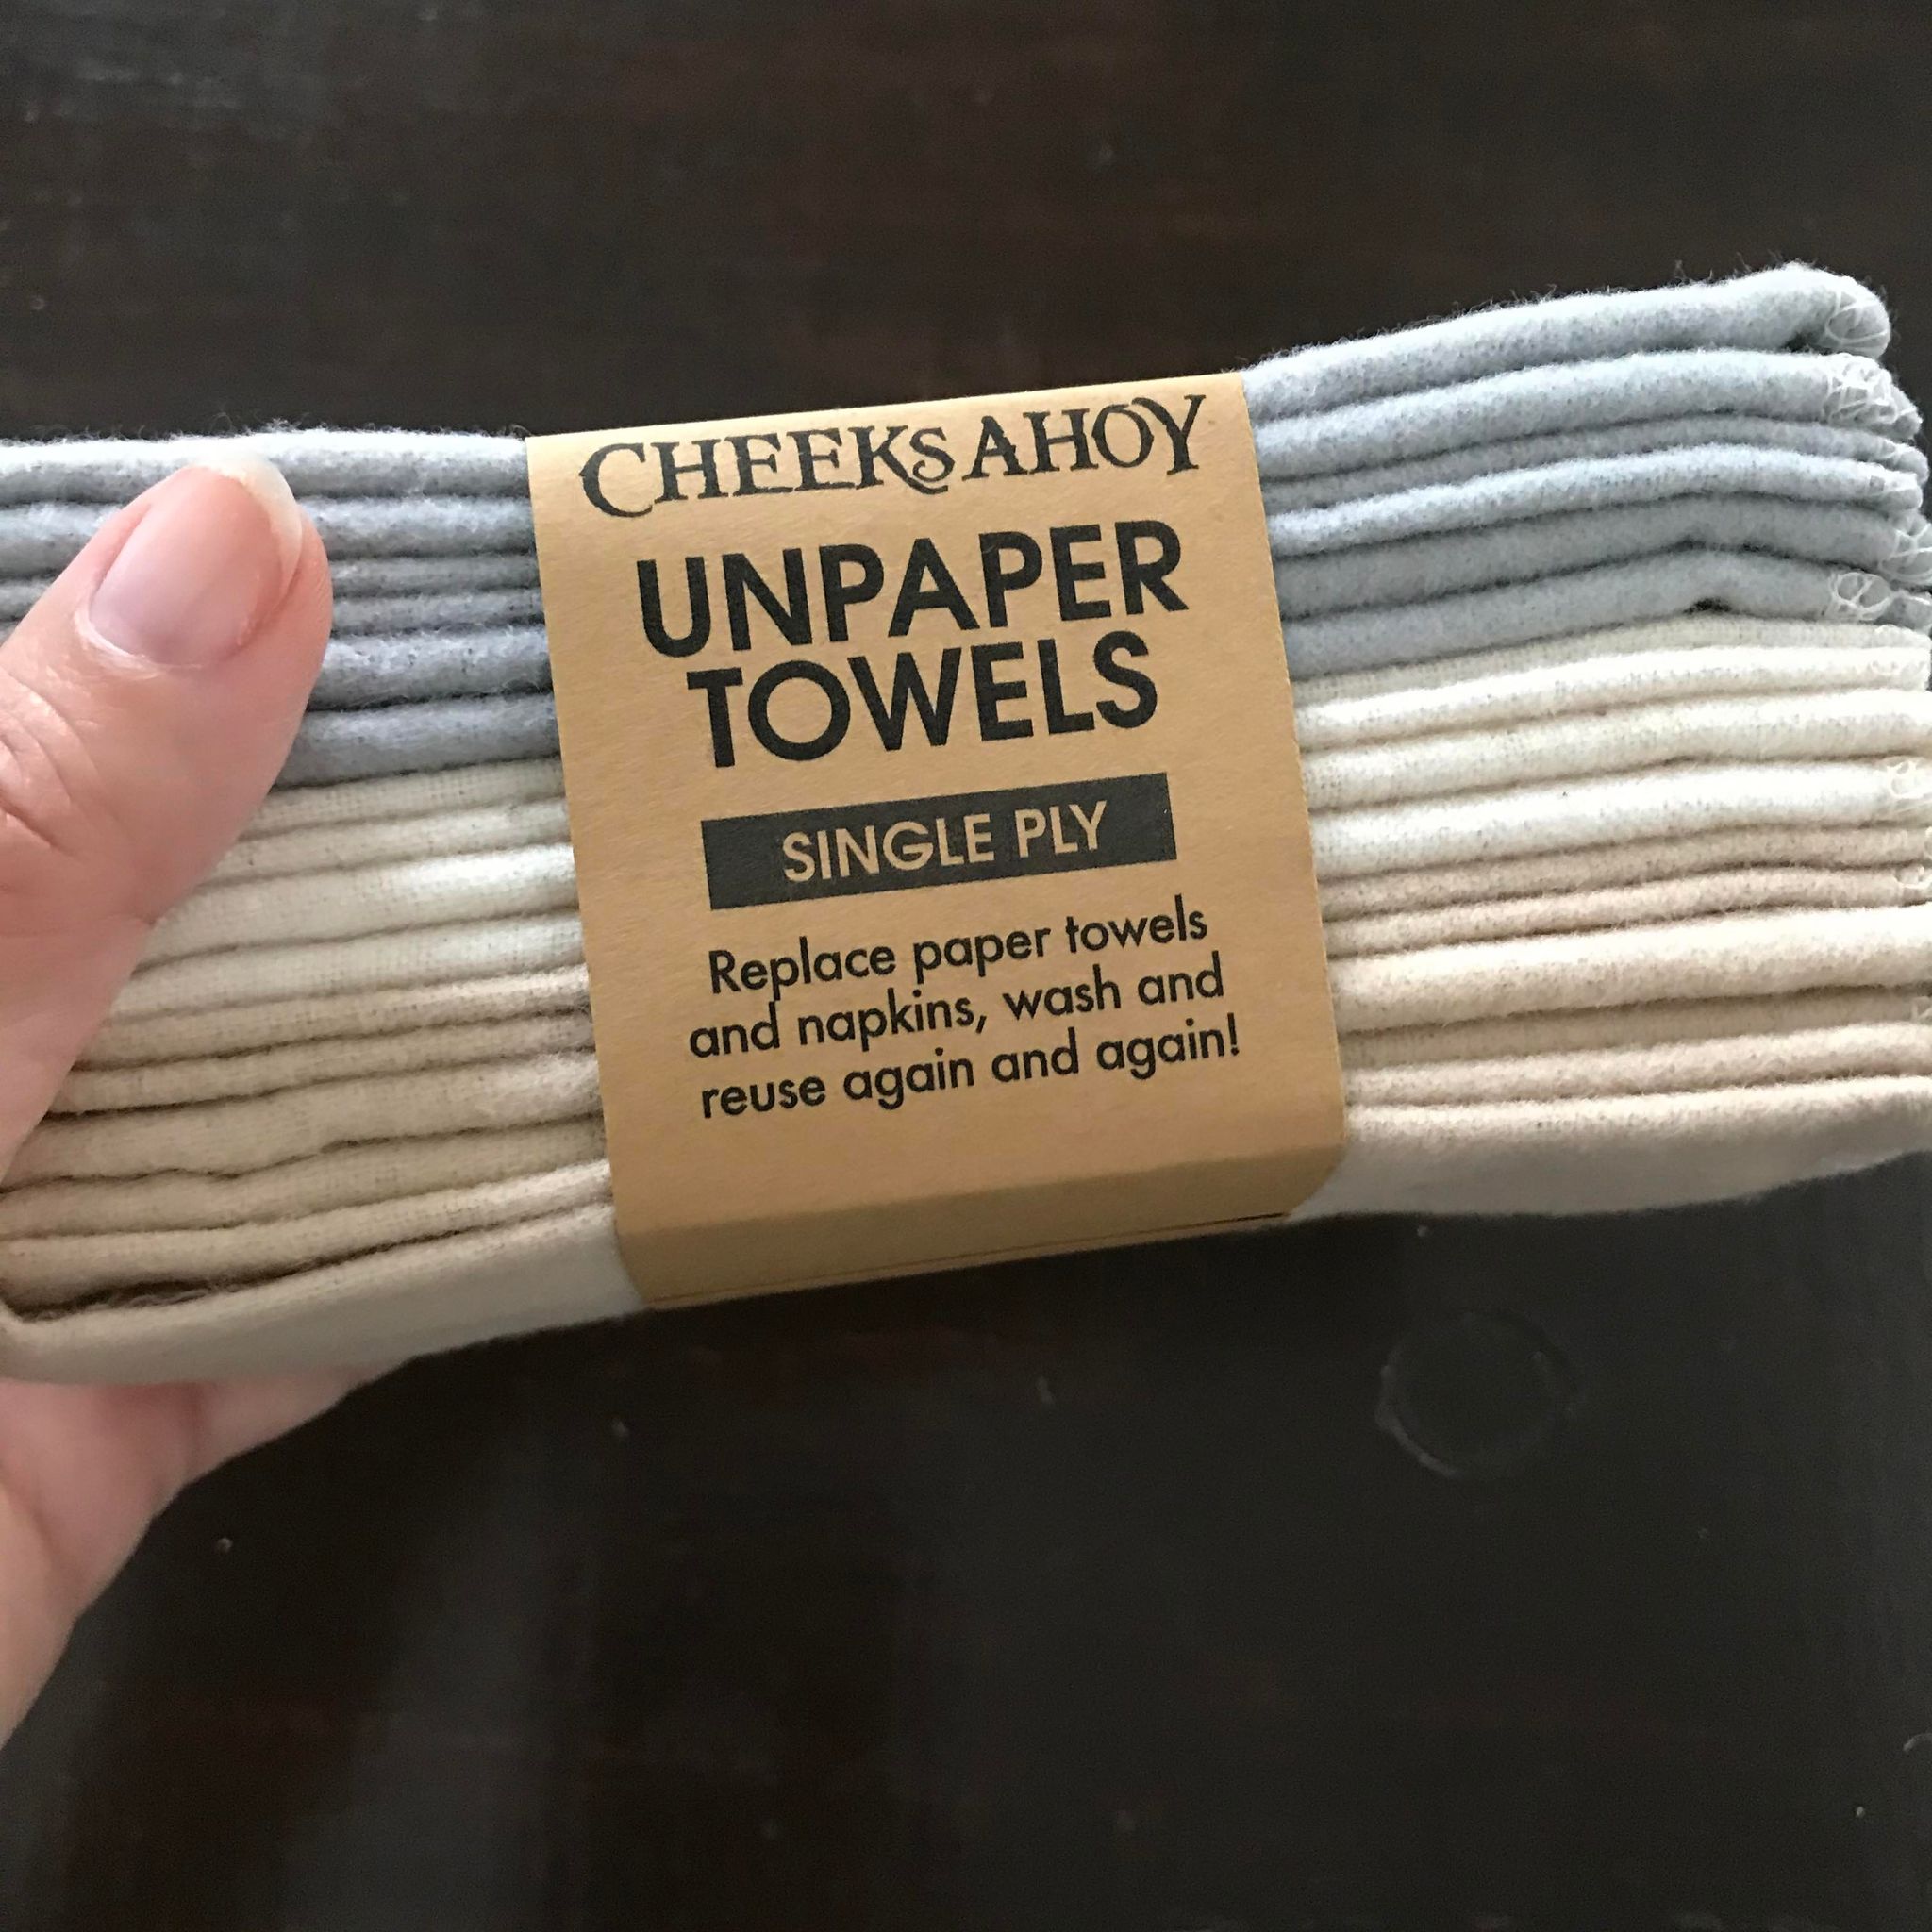 Set of 8 single ply cotton Unpaper Towels in suave light neutral shades handmade in Canada by Cheeks Ahoy replace paper towels and napkins, wash and reuse again and again